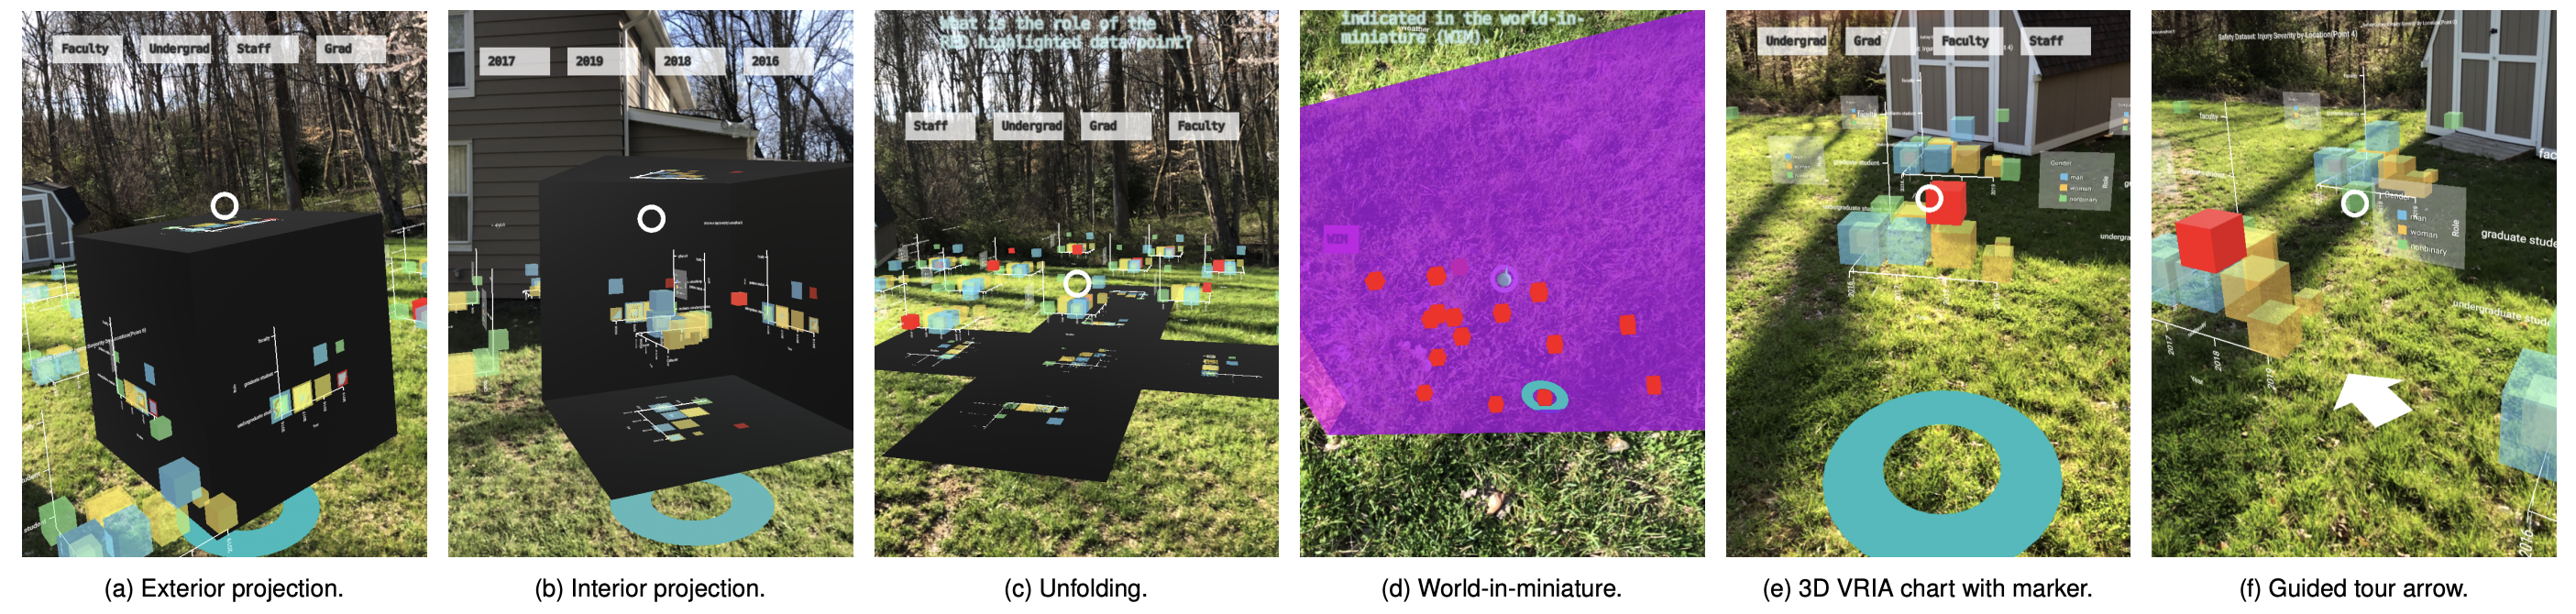 Teaser for Evaluating View Management for Situated Visualization in Web-based Handheld AR